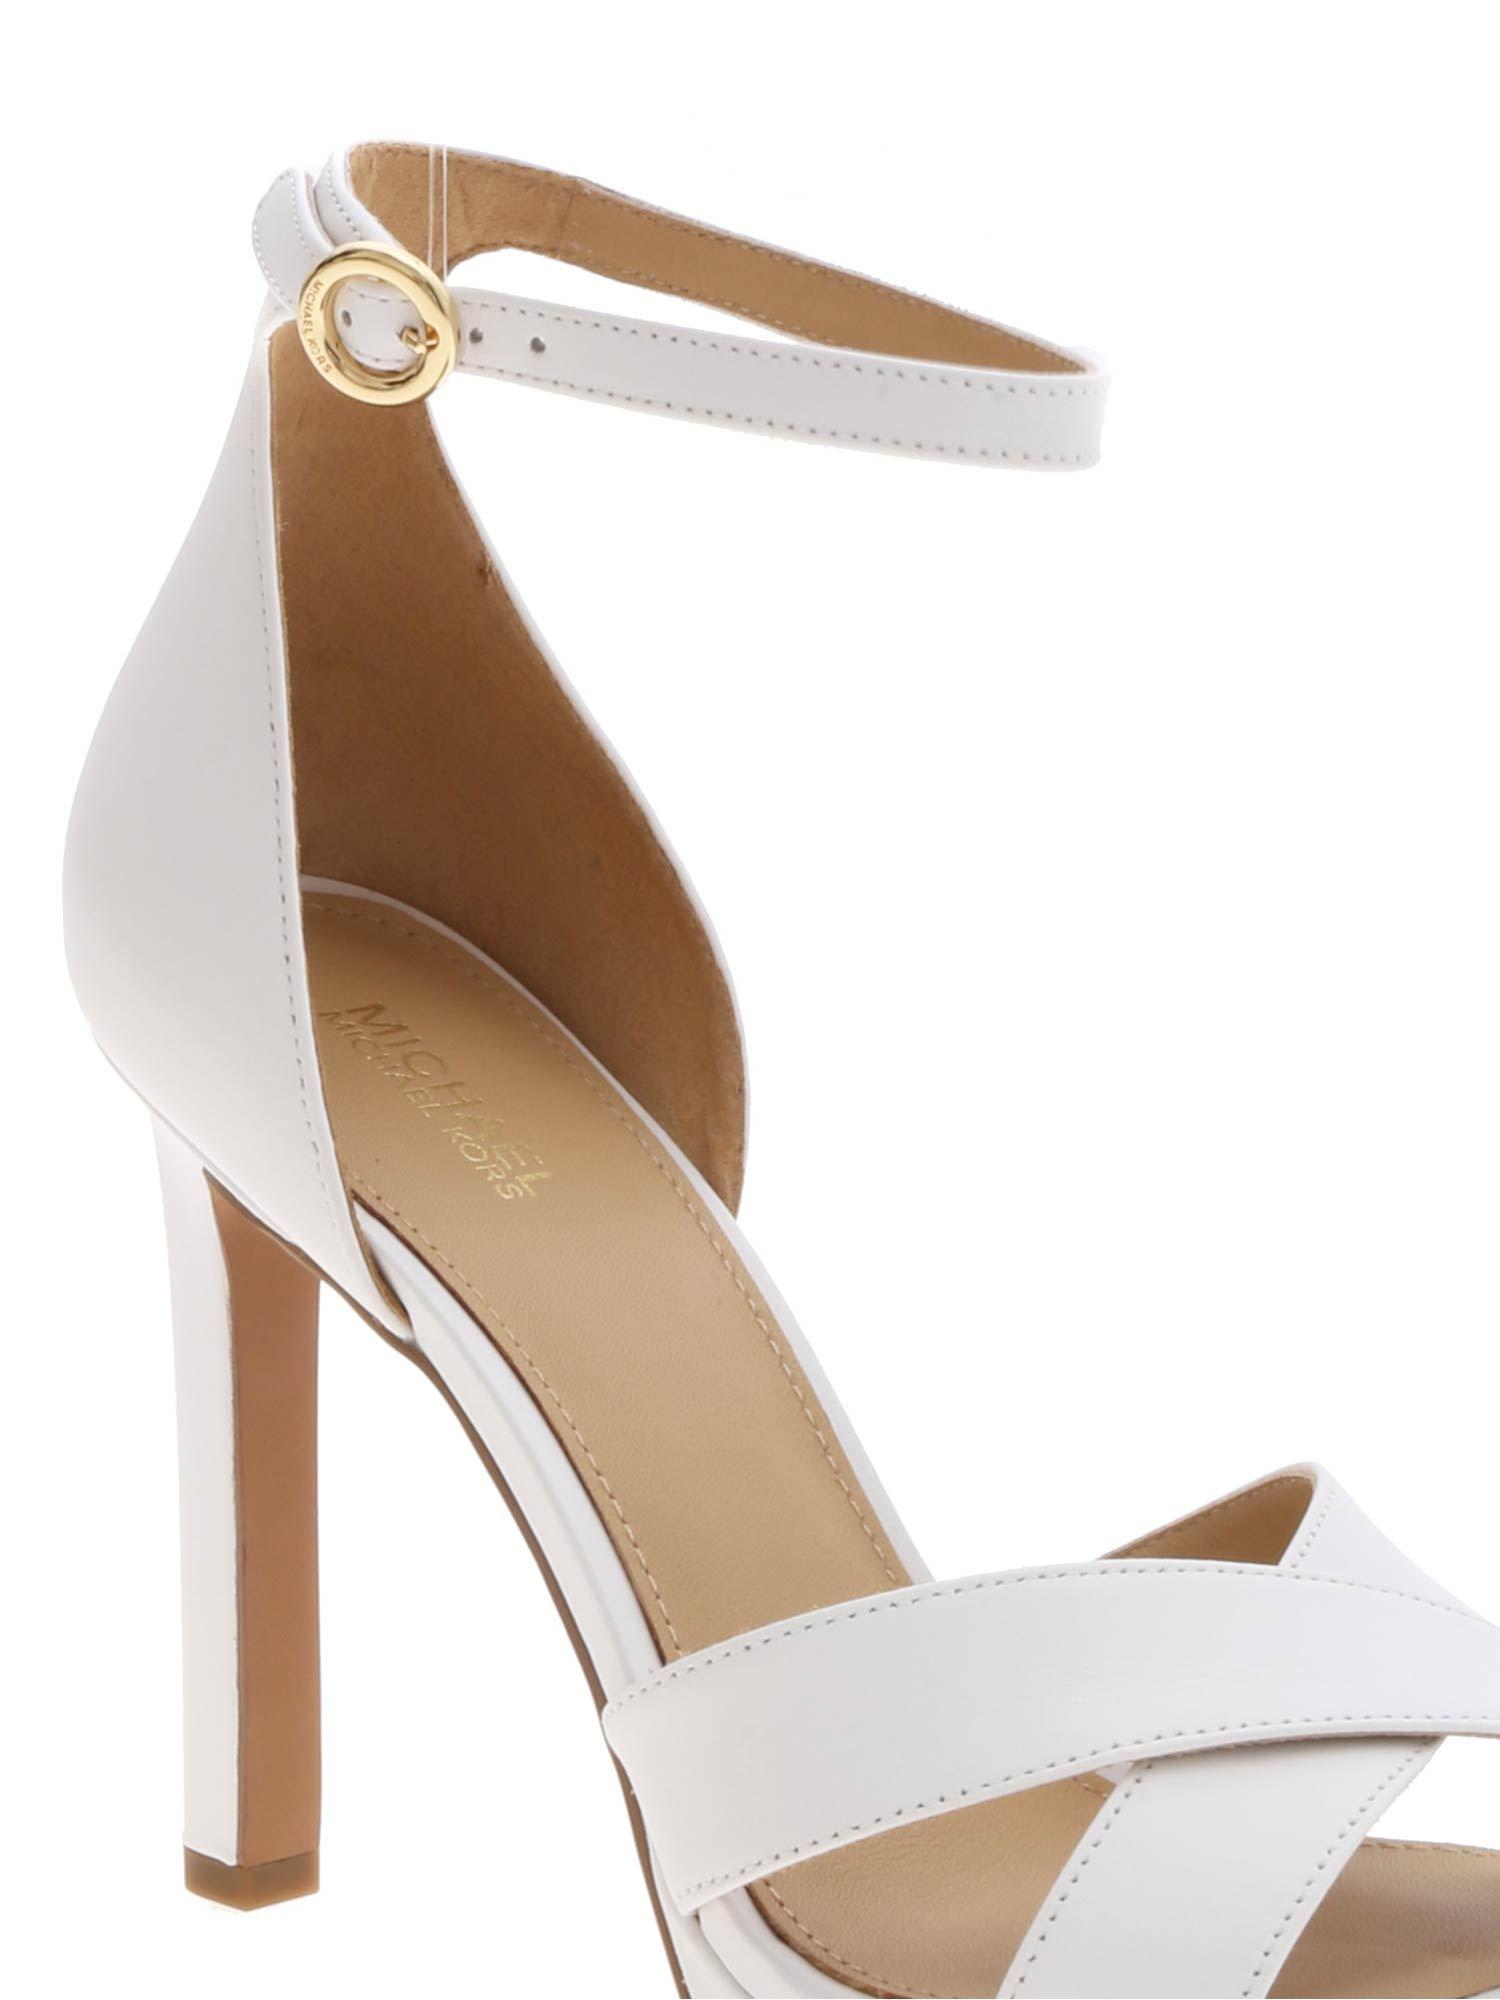 Michael Kors Alexia Sandals In White in White - Lyst